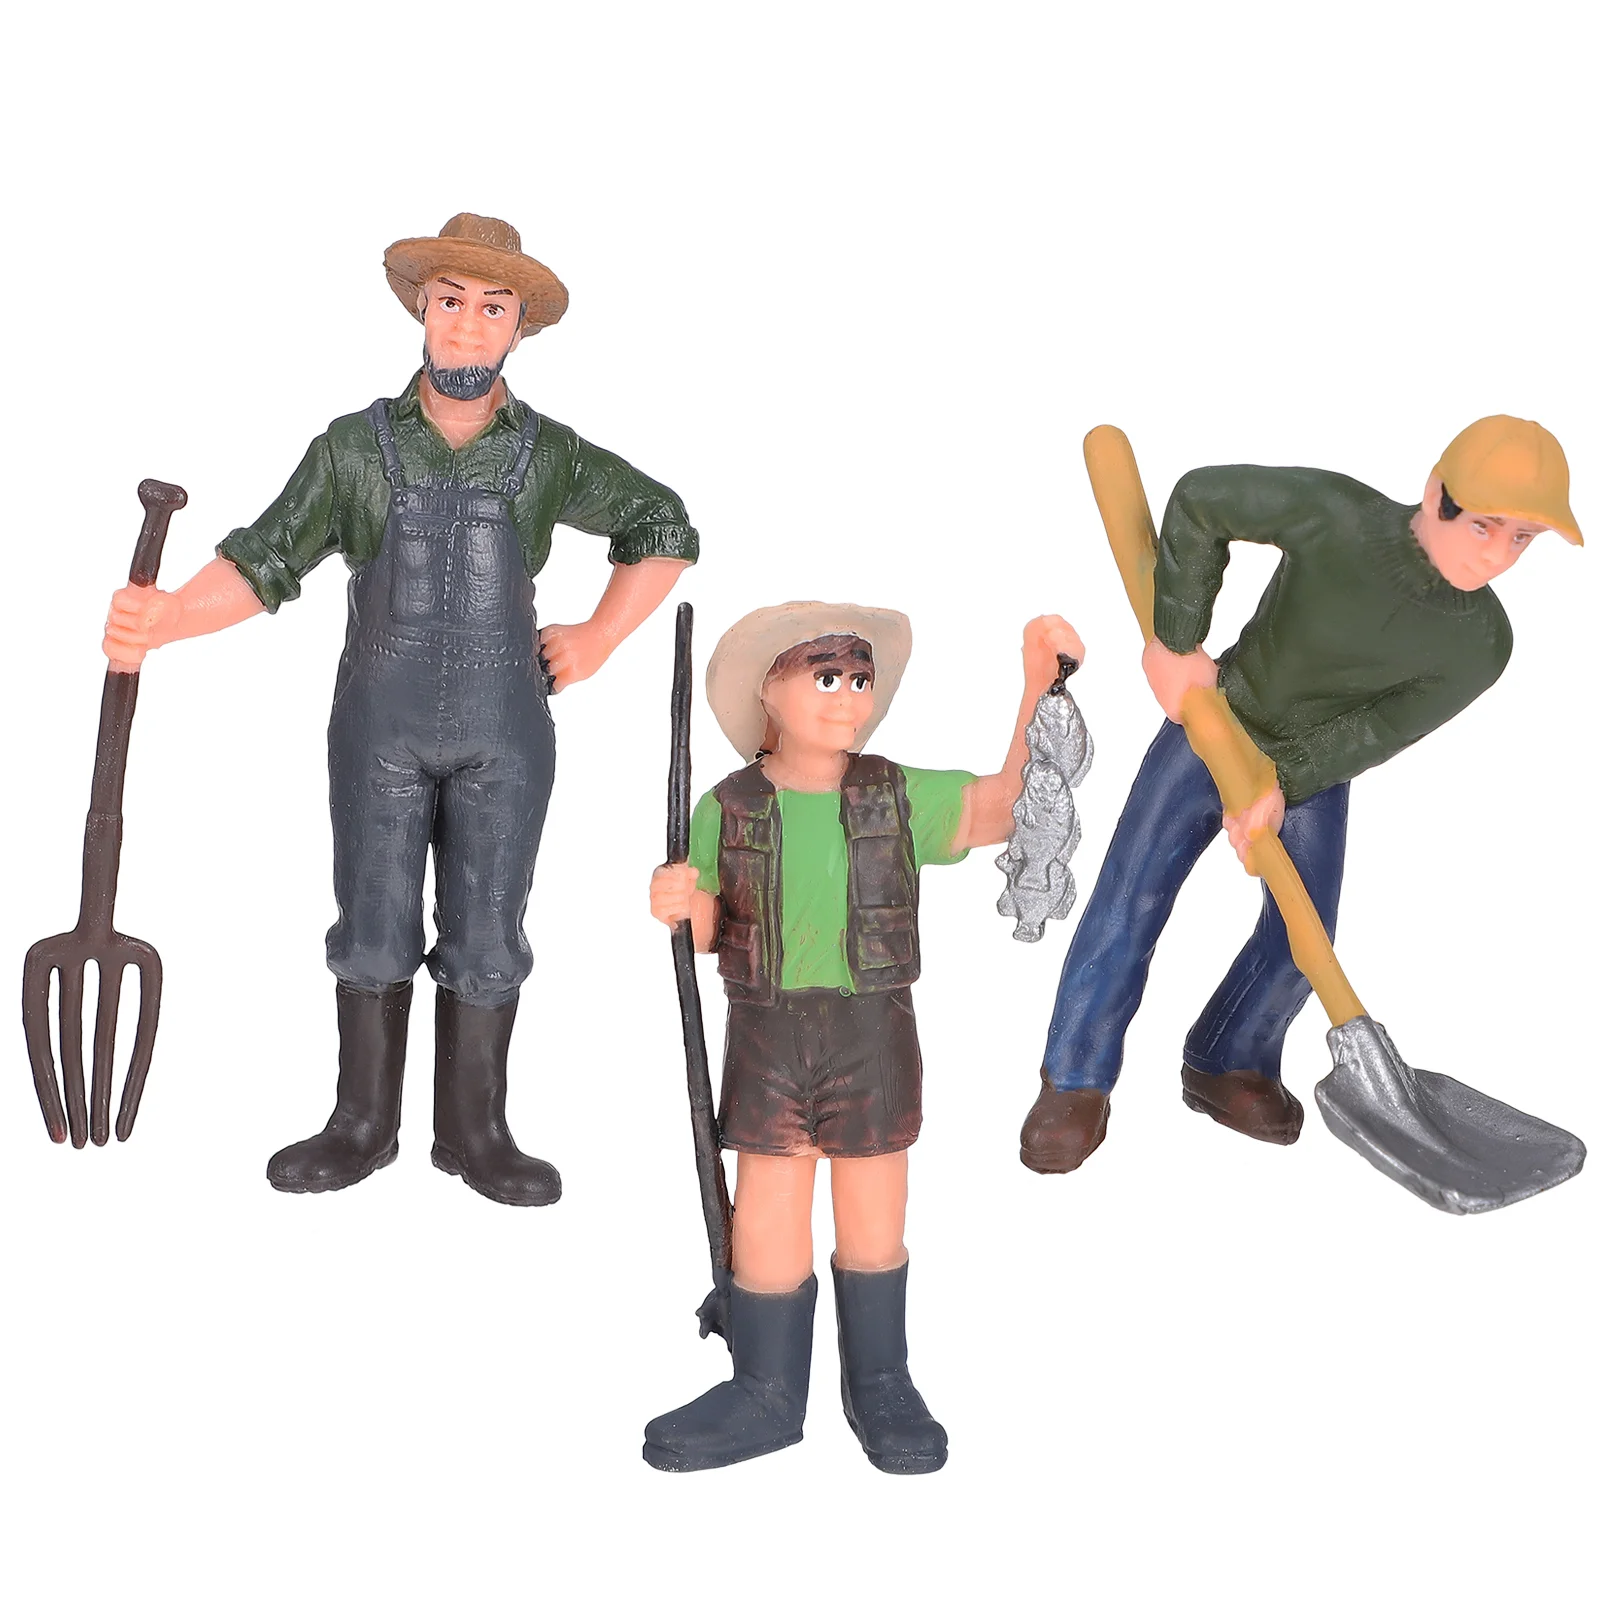 

3 Pcs Farm Worker Toy Mini Character People Figures Table Top Decor Playset Sand Toys Childrens Educational Figurines